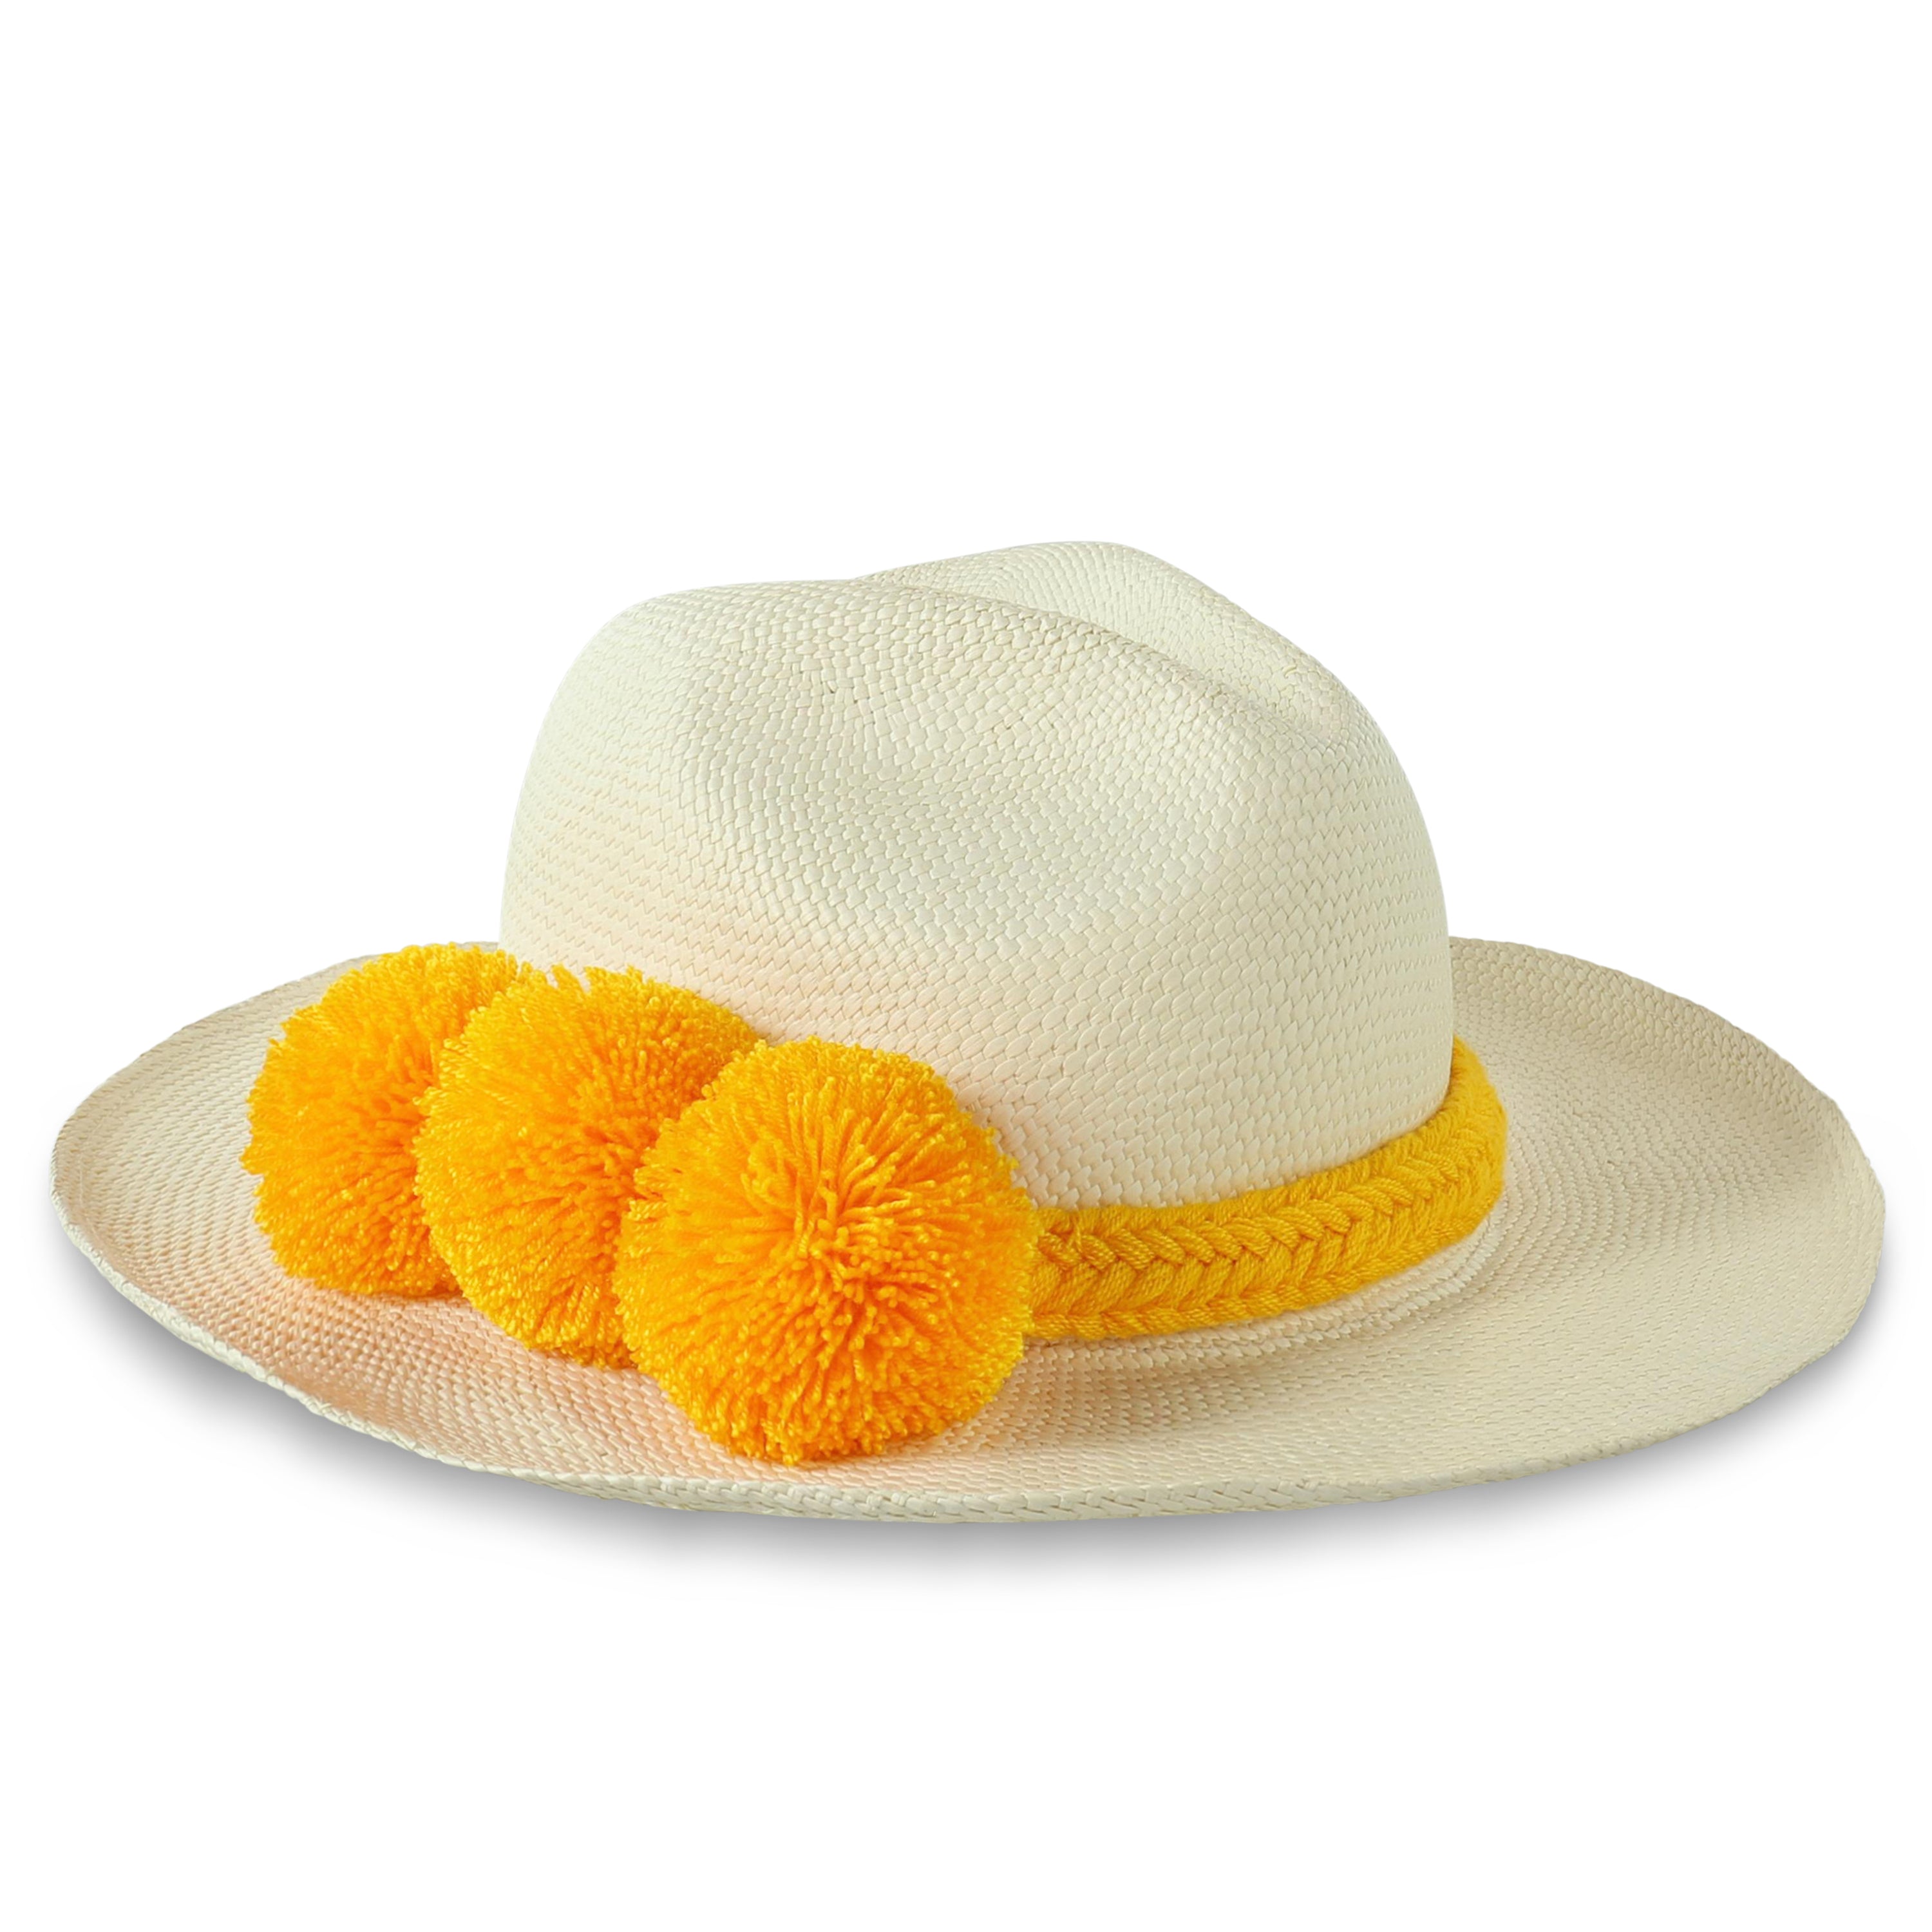 GUADALUPE HAT + WHITE YELLOW POM POM